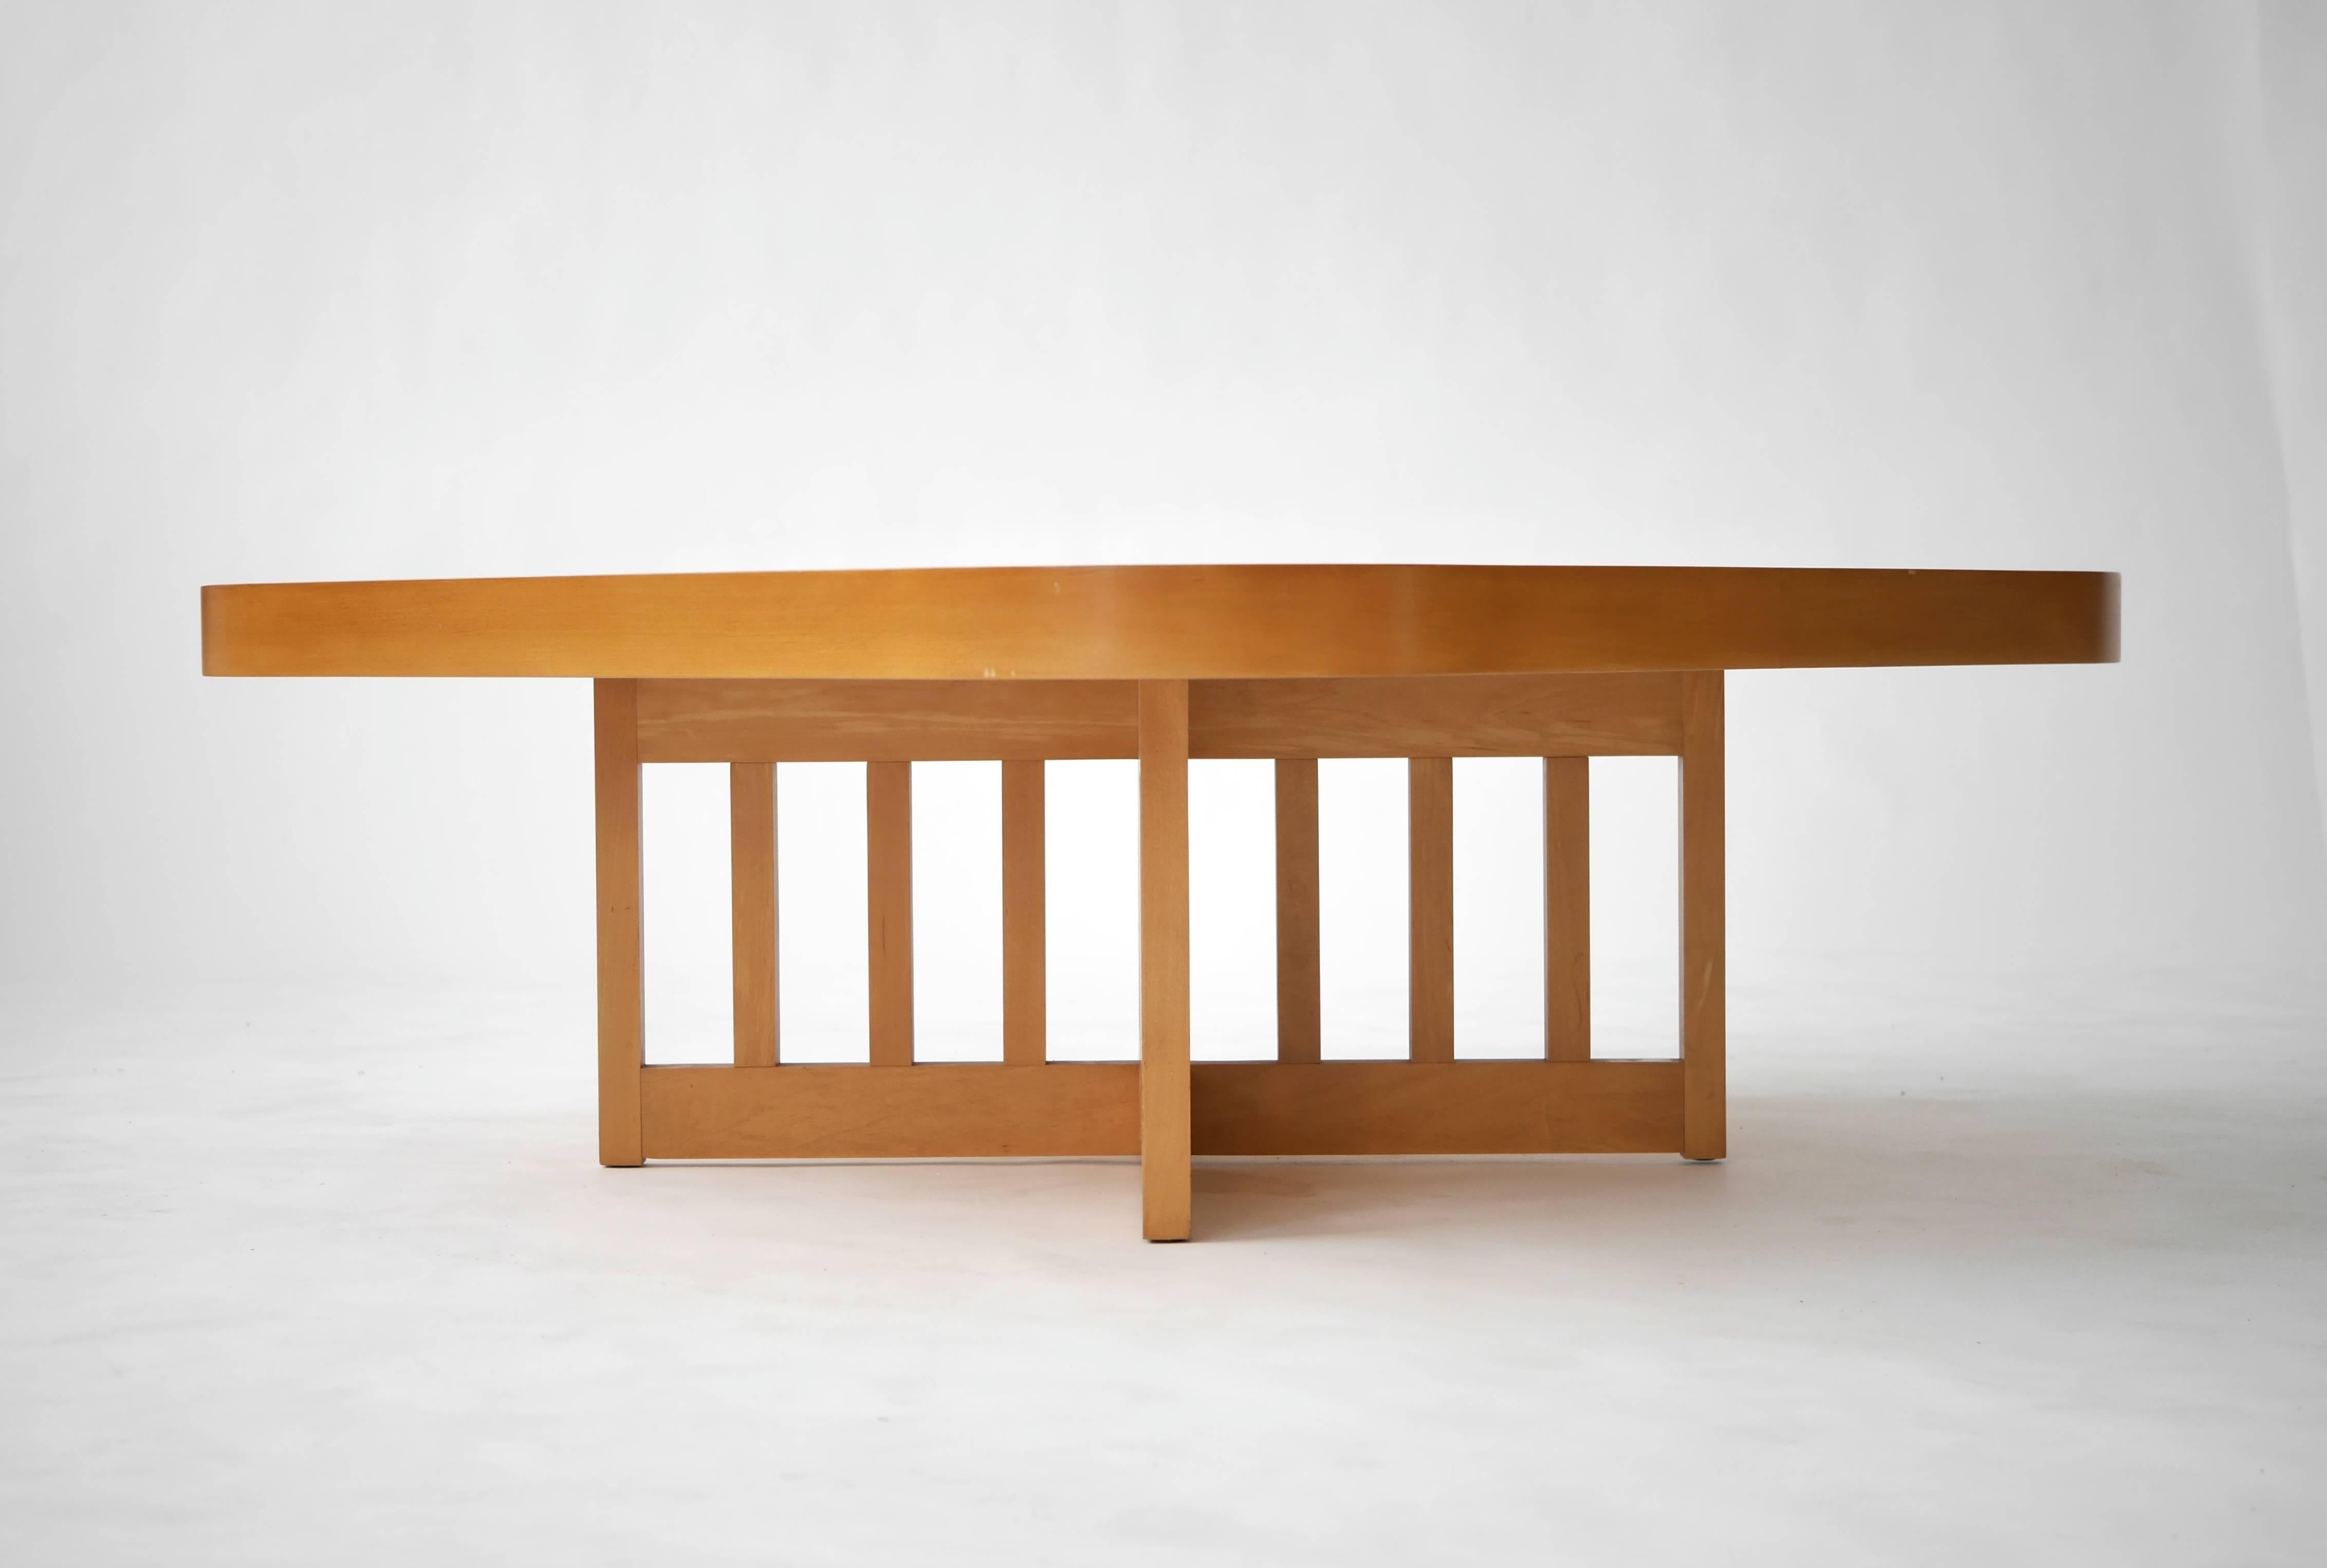 In the early 1980s Knoll commissioned Richard Meier to develop a collection of furniture incorporating Meier's love of
work of the early modernist Charles Rennie Macintosh. This is a rare example in natural maple. Signed on bottom.